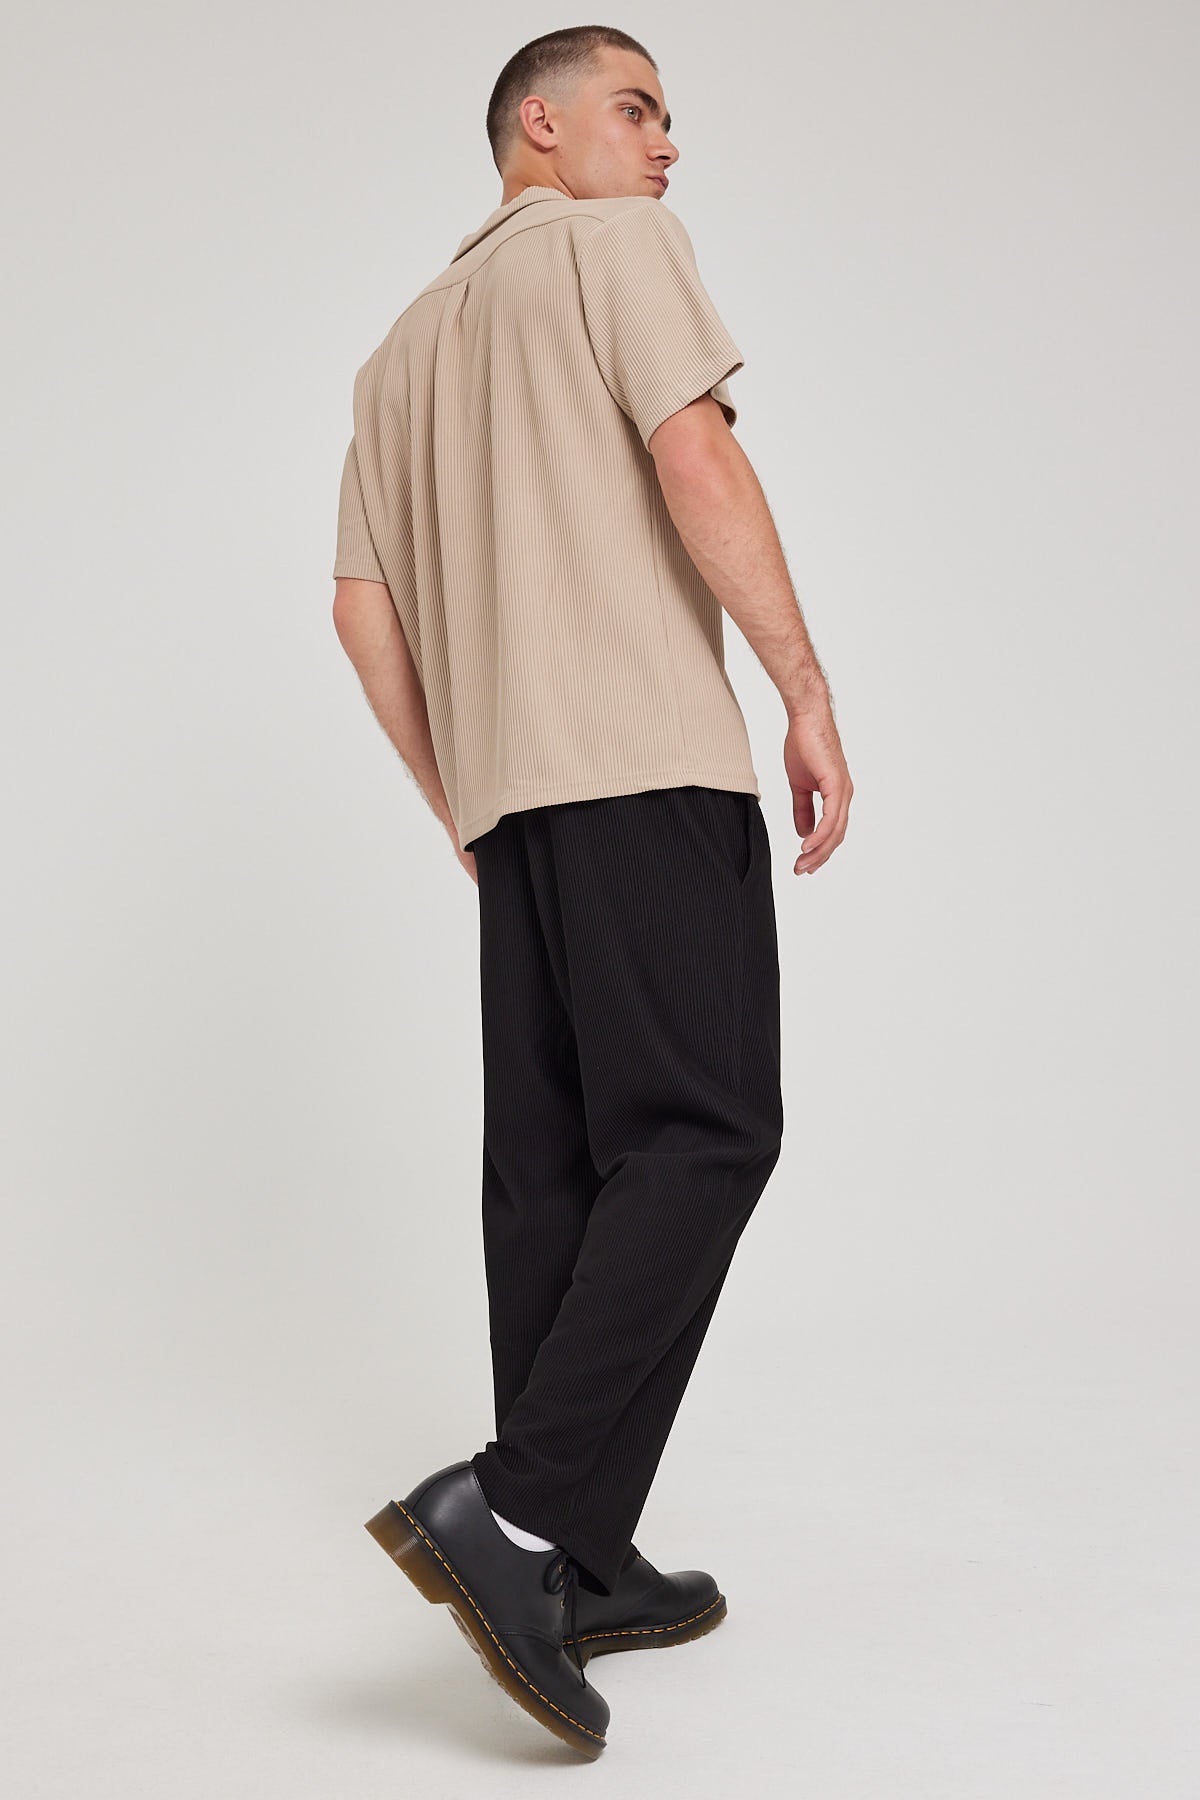 Common Need Relaxed Pleated Elastic Waist Pant Black